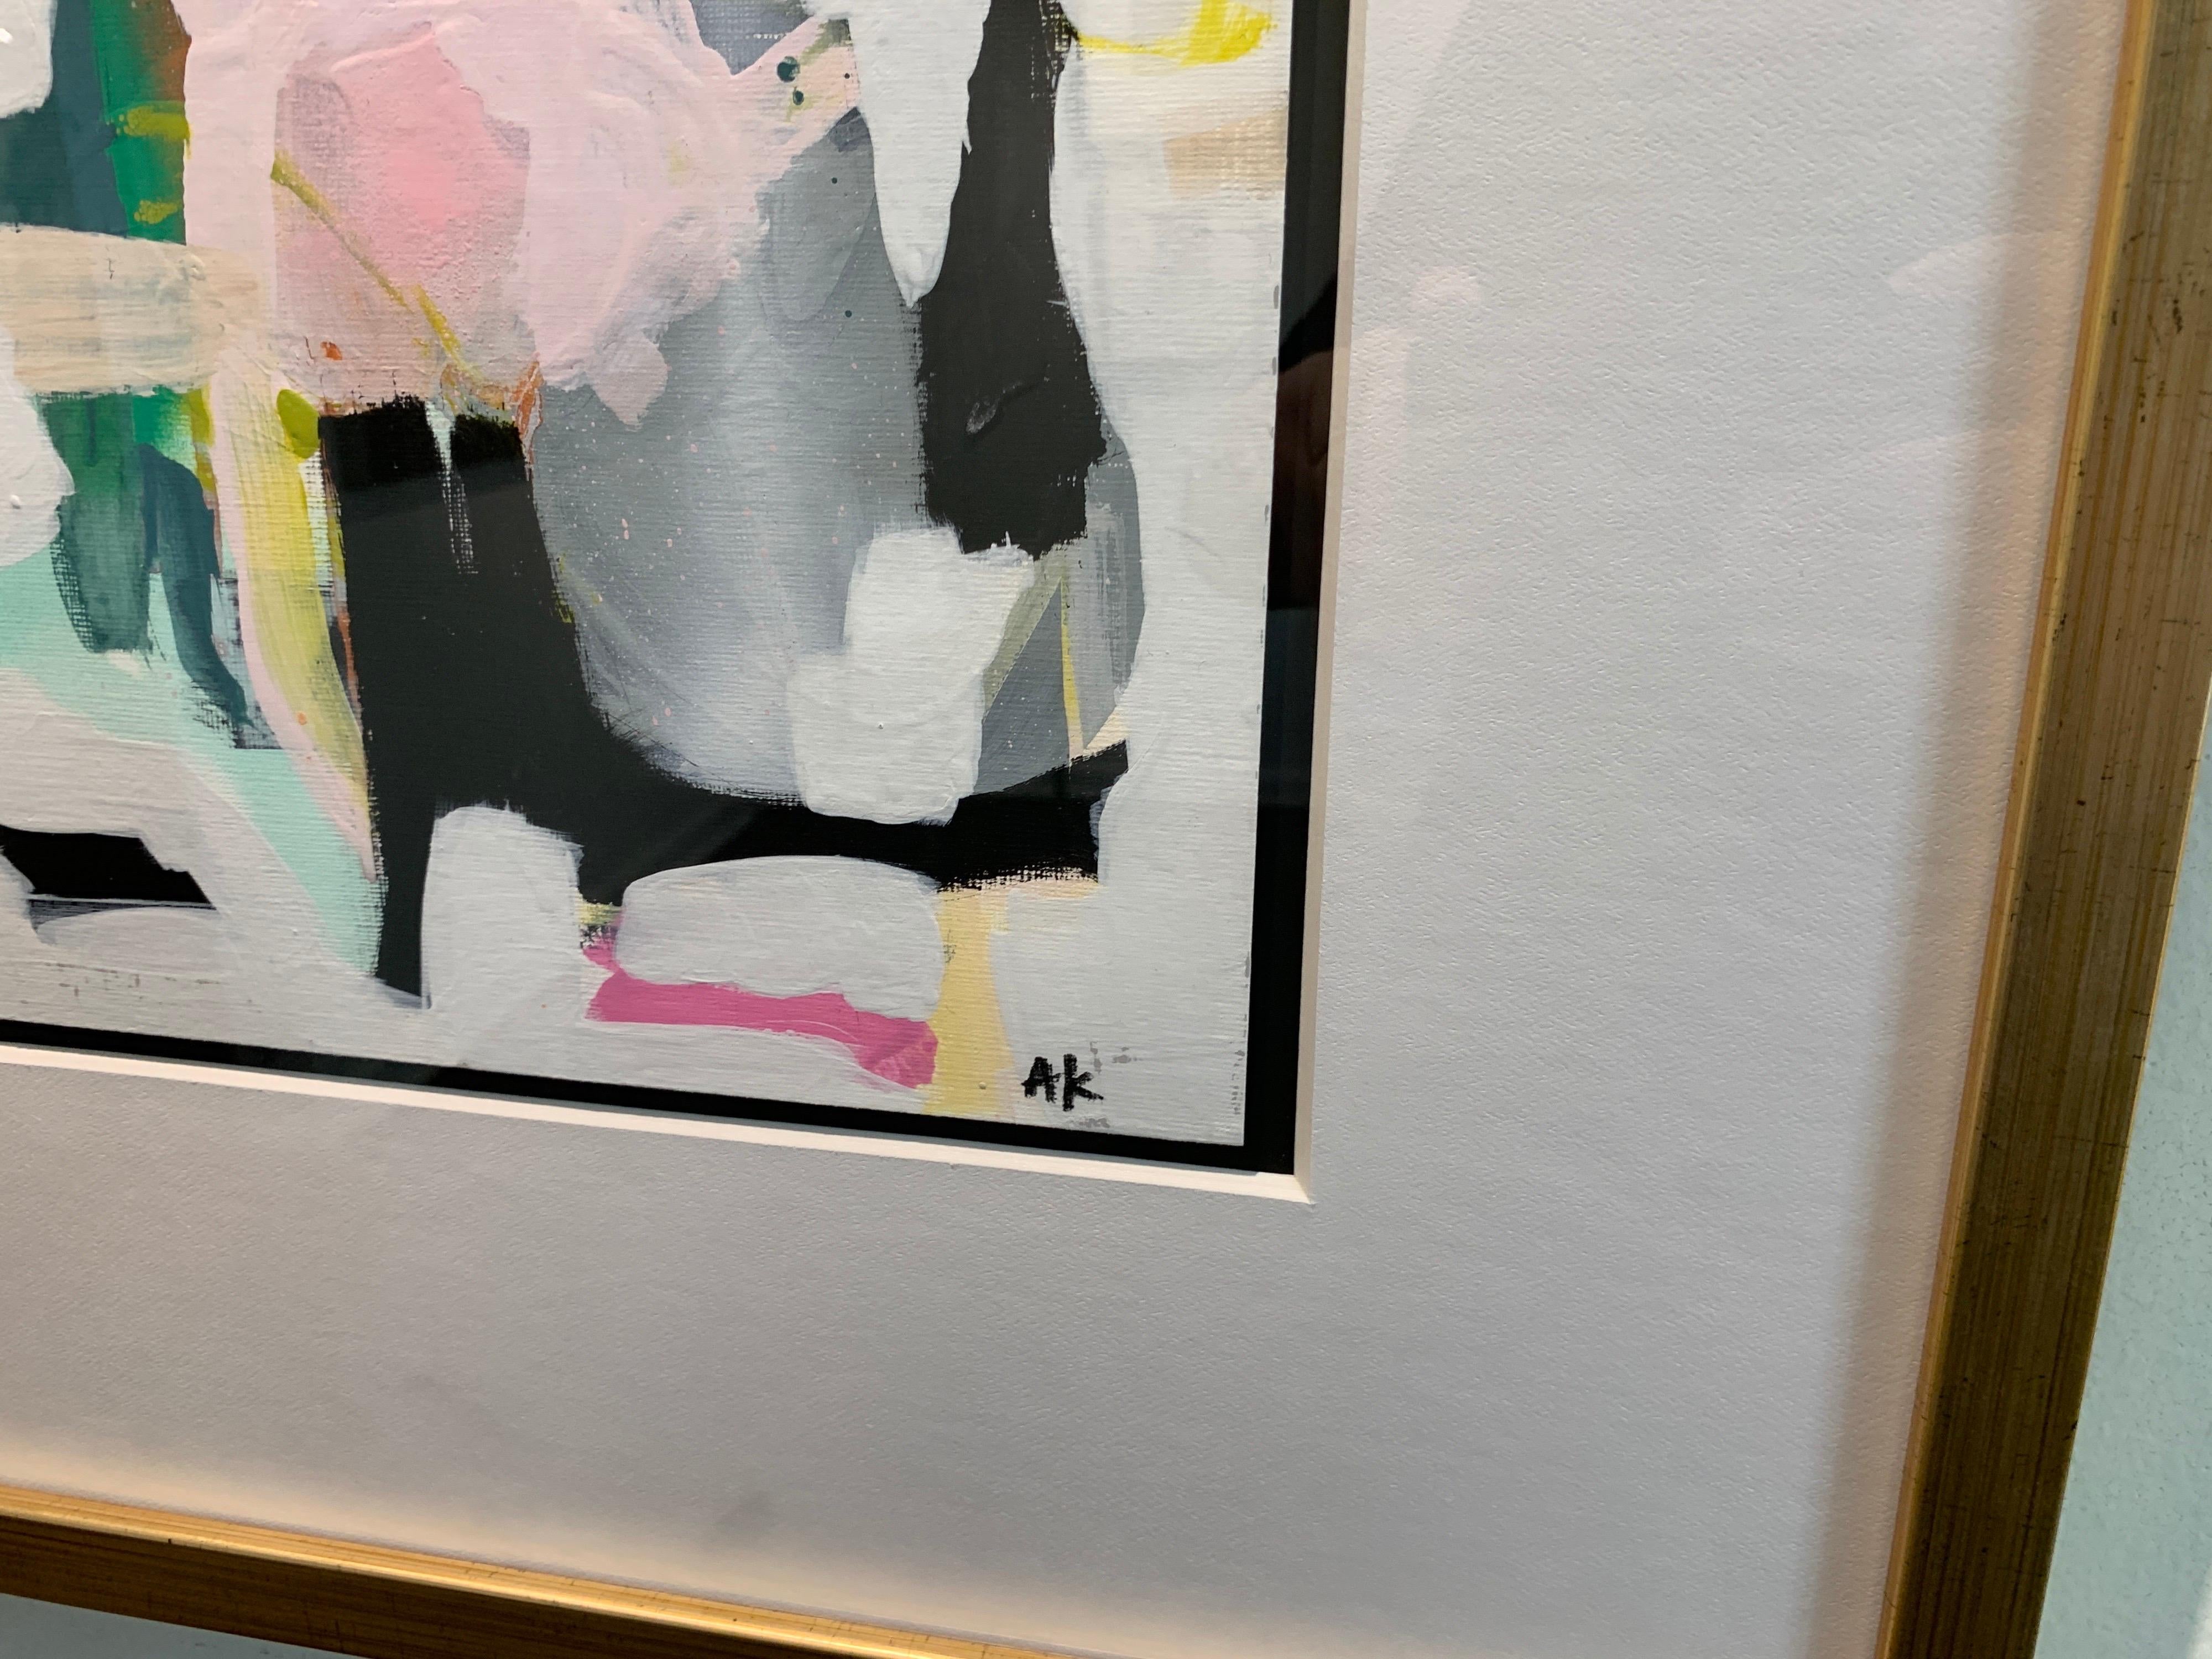 'Untitled 145' is a mixed media on paper framed abstract painting of vertical format created by American artist Annie King in 2020. Featuring a palette made of  black, blue, yellow, pink, green and other tones, this painting showcases joyous fields